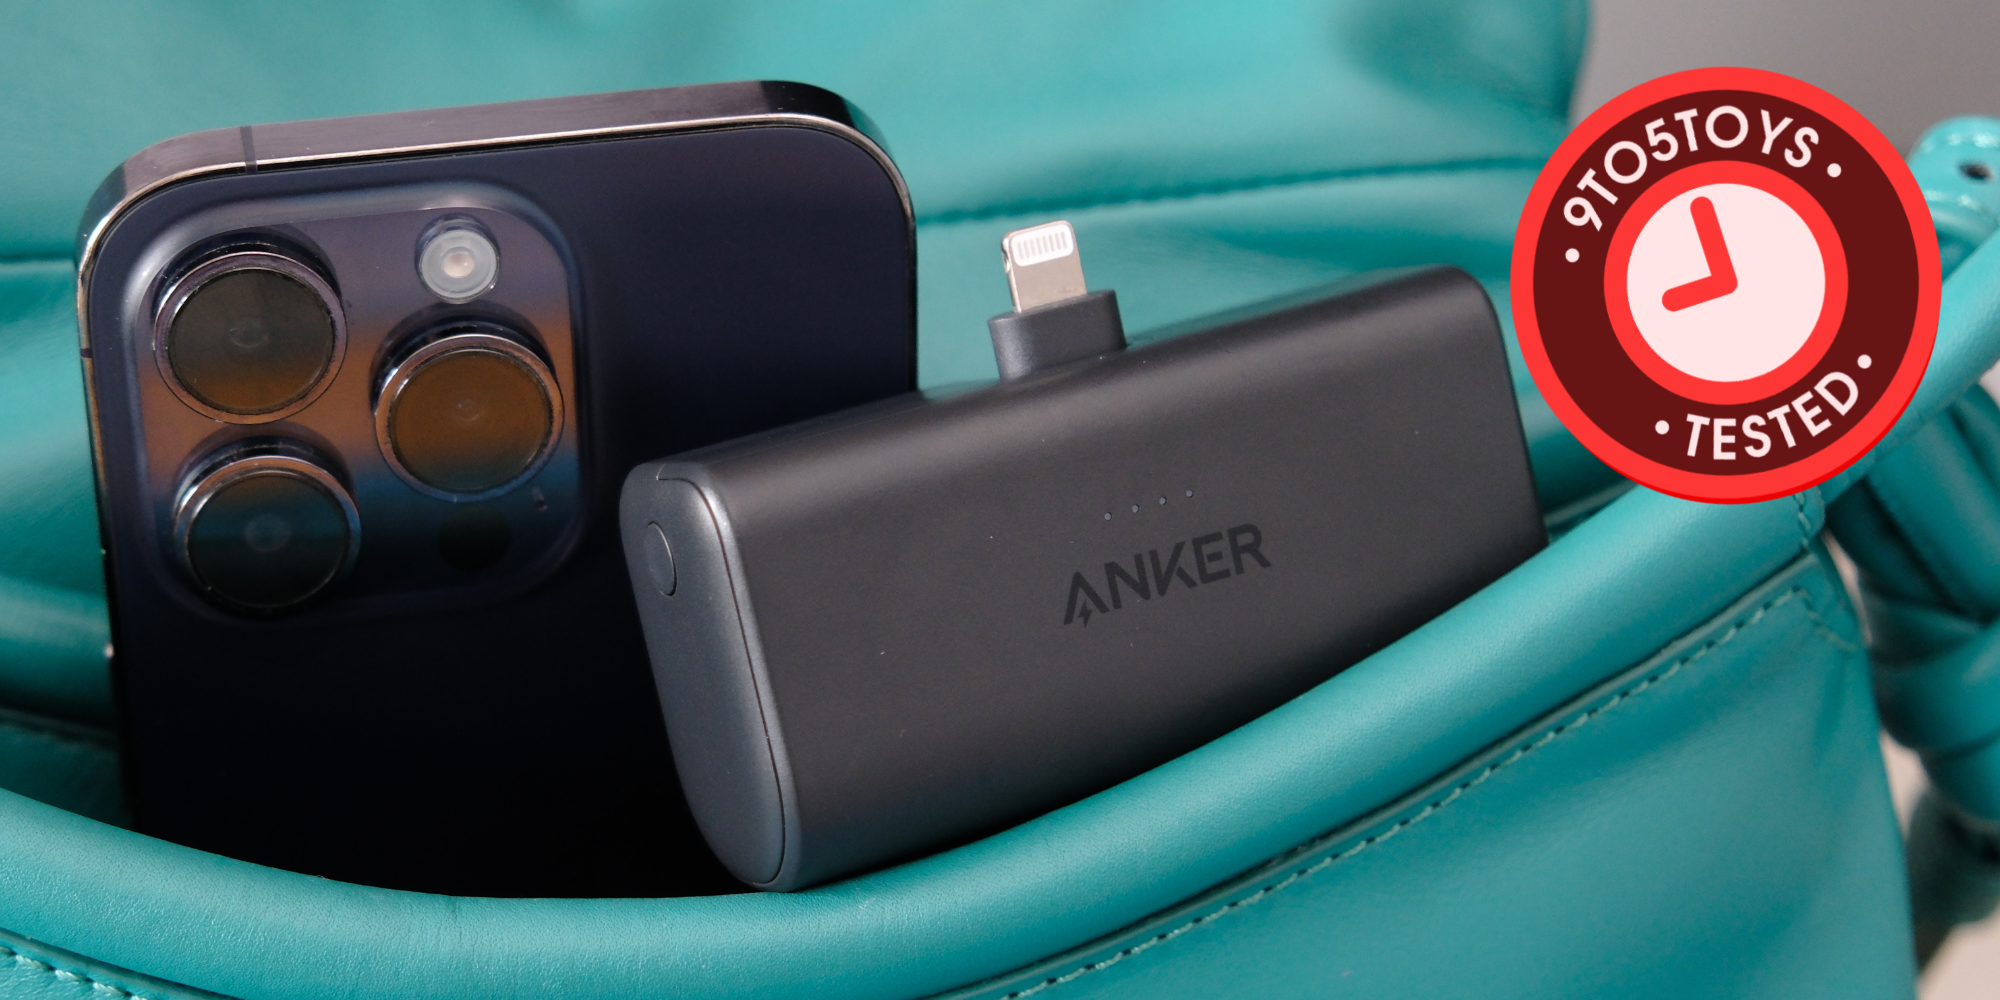 Anker's new 100W GaN charger beats Apple's closest offering in 3 ways